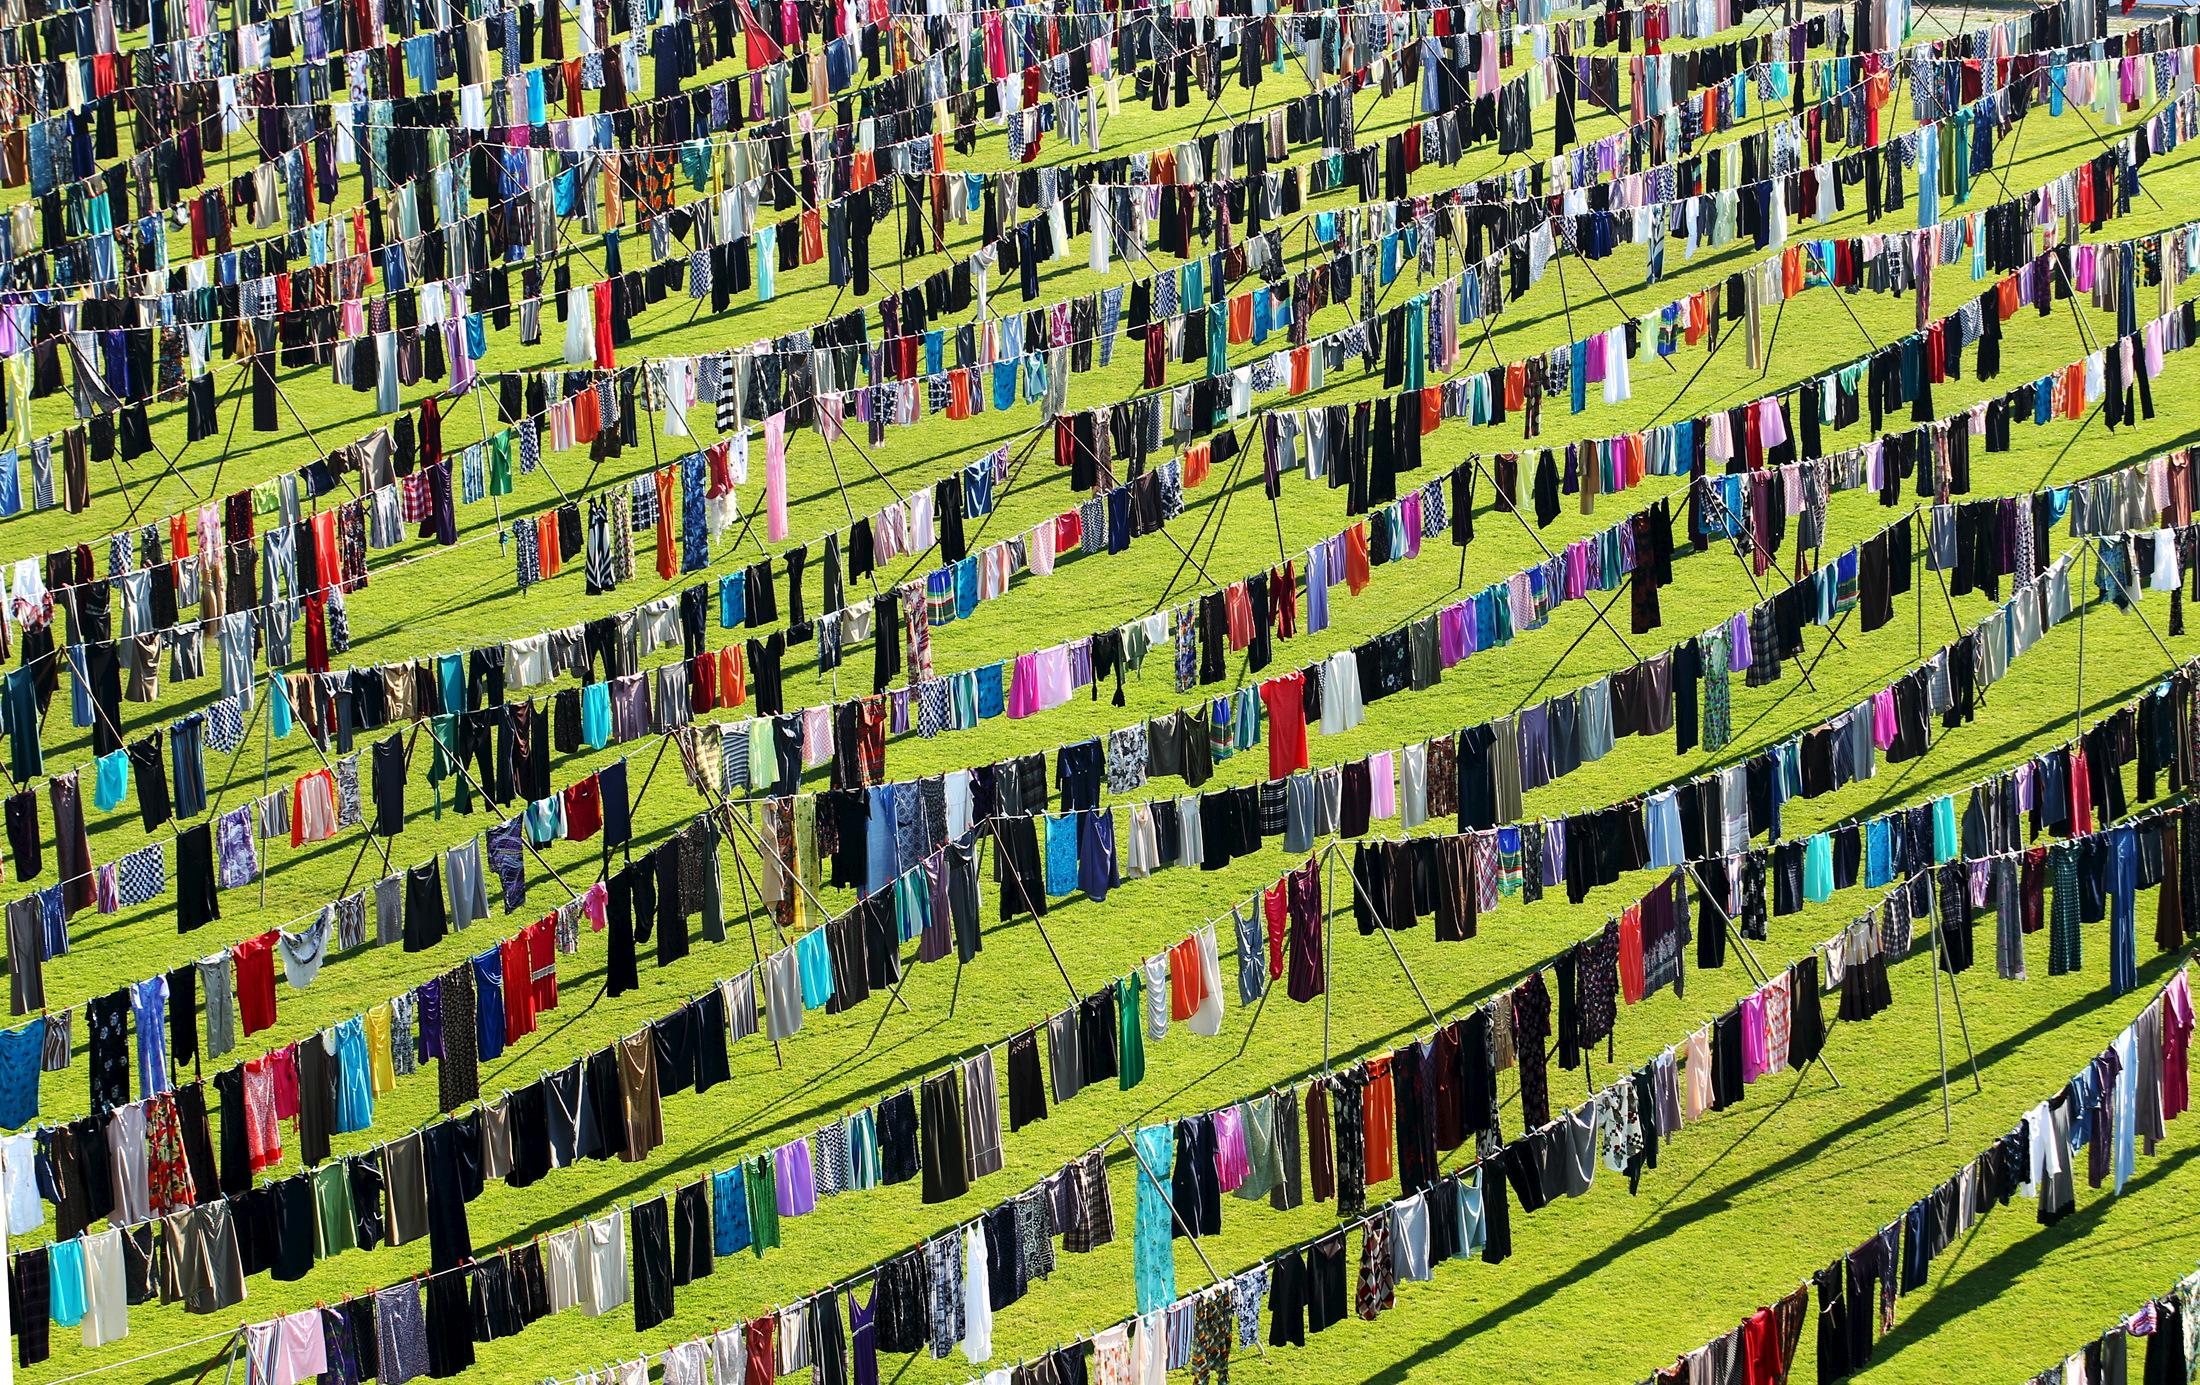 An exhibition by artist Alketa Xhafa-Mripa features thousands of dresses on clotheslines to draw attention to the tragedy of wartime sexual violence. Kosovo National Stadium, in Pristina, June 2015.